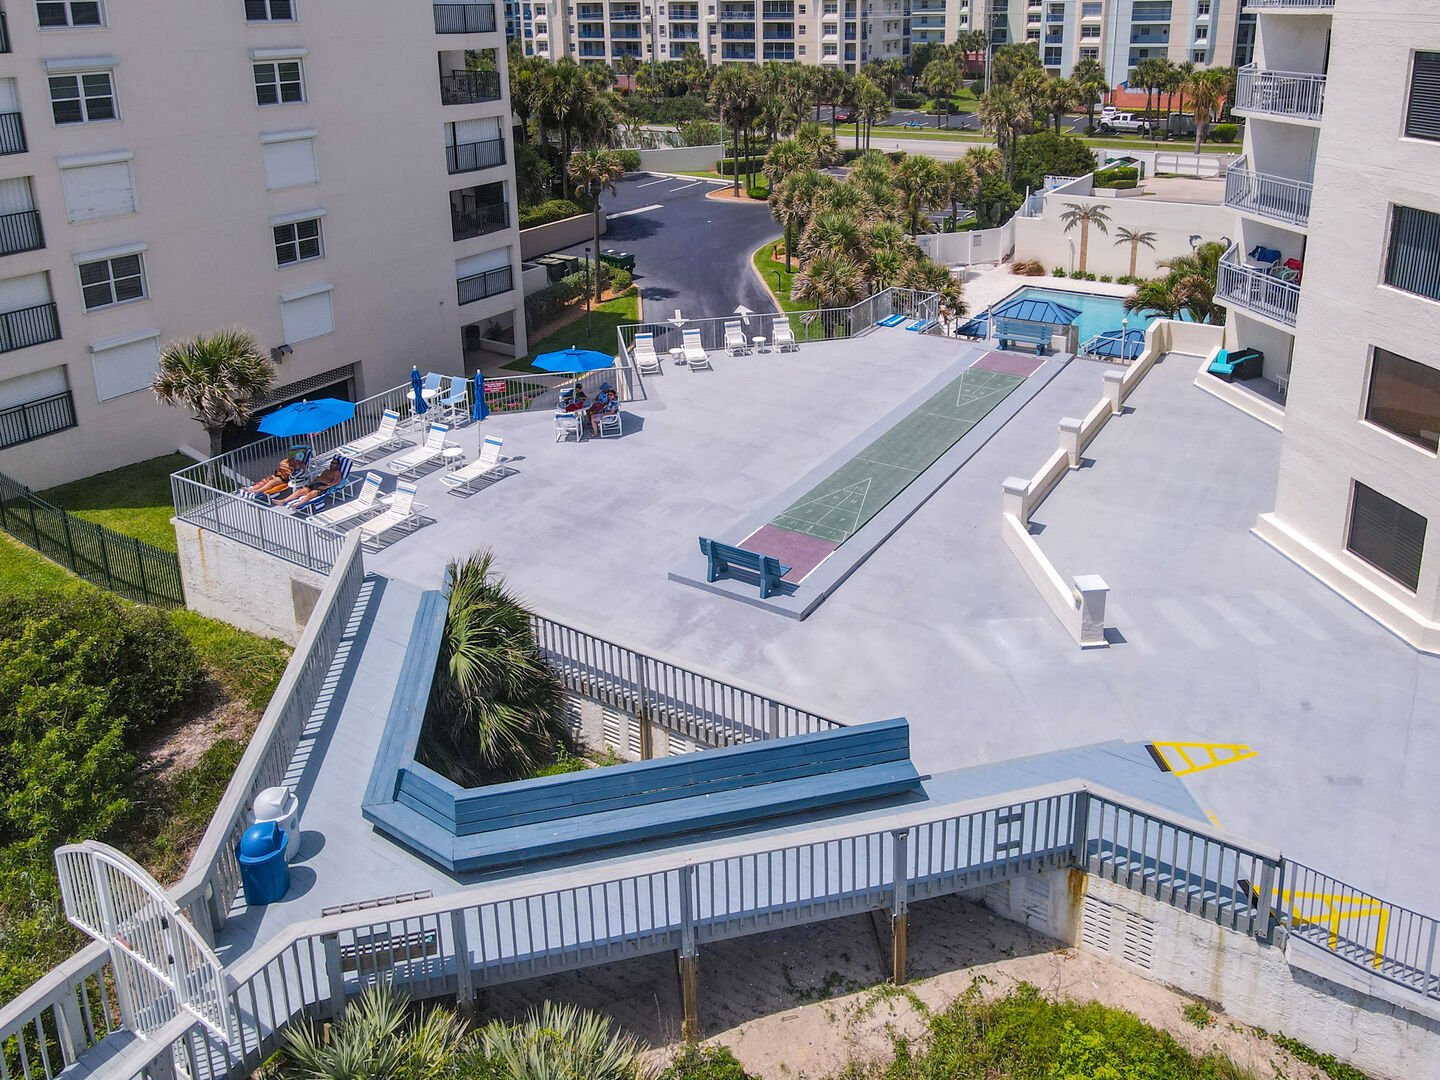 Sun deck an outside shuffleboard courts with access to the beach just outside the ground level patio doors!